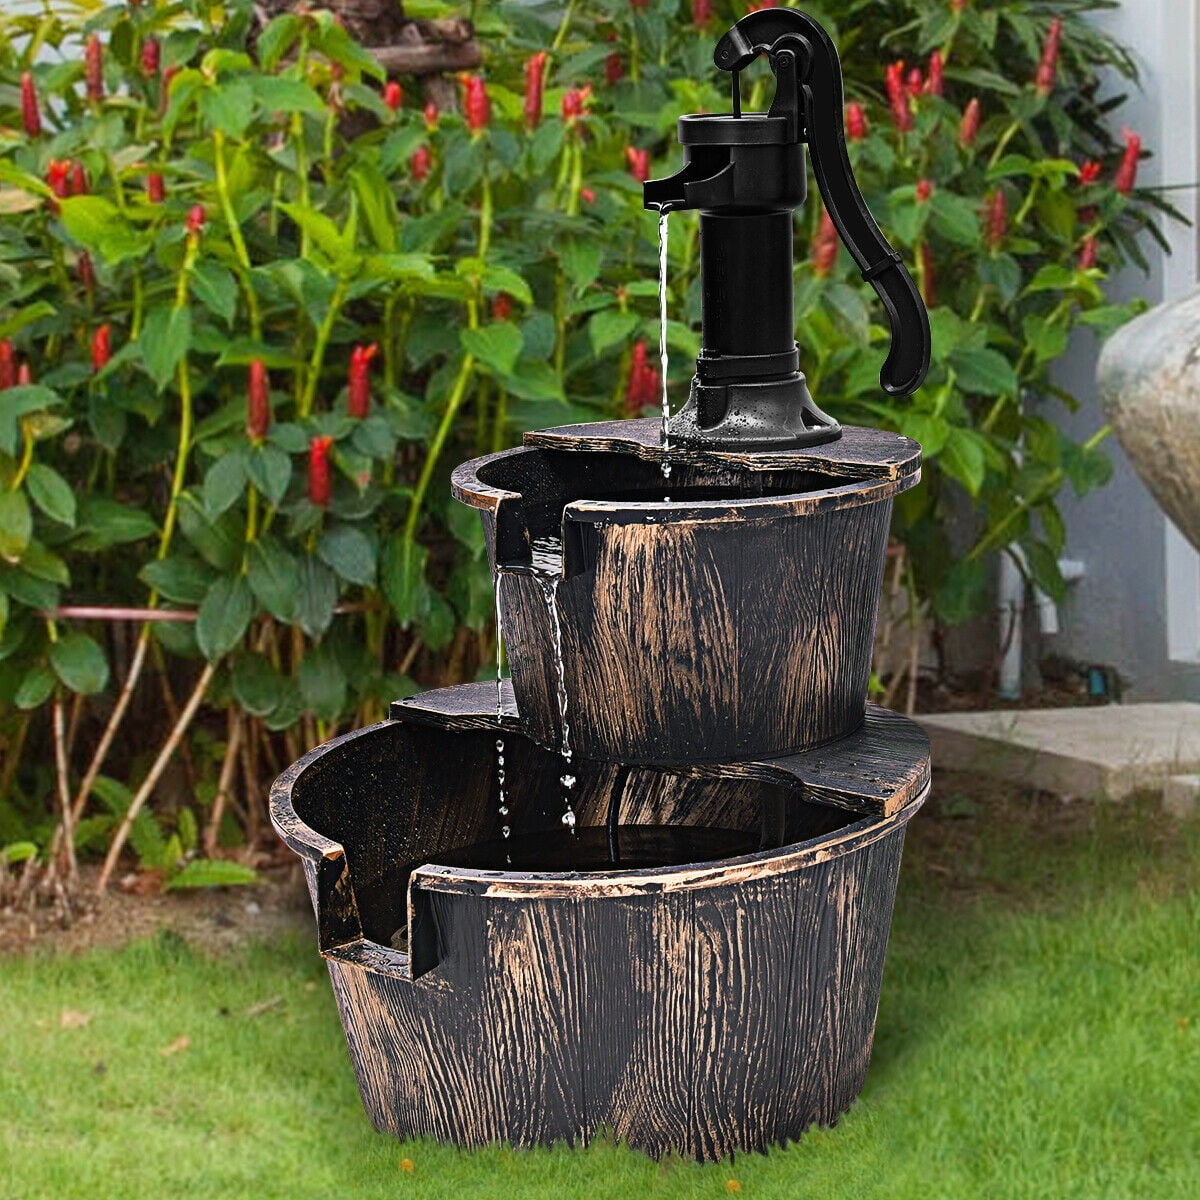 Garden Wooden Wishing Water Fountain Well with Pump Patio Yard Outdoor Decor US 